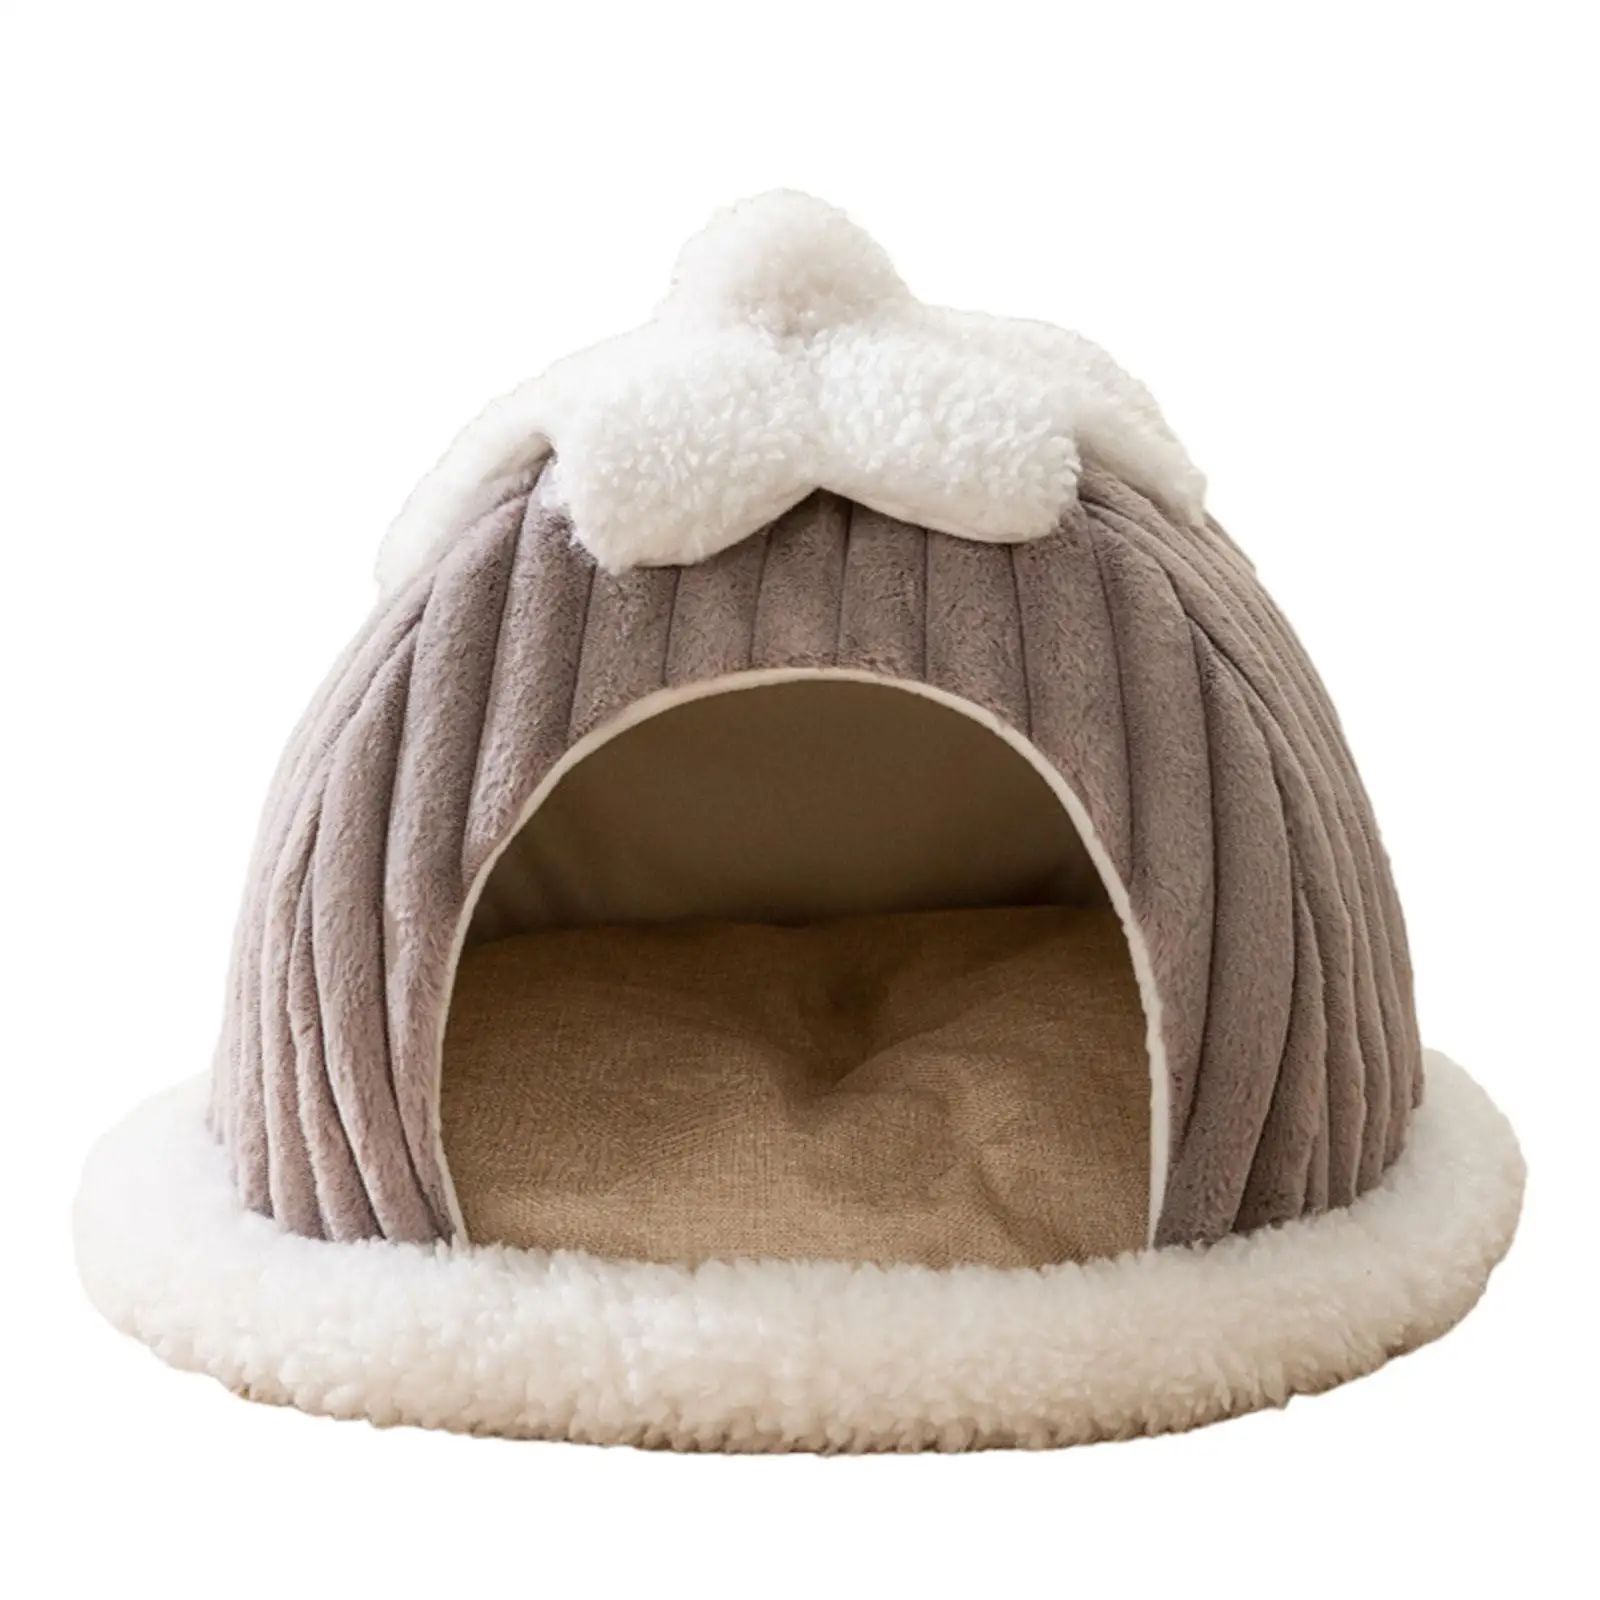 Cat Bed Self Warming Cat House Semi Enclosed Pet Cat Nest Cat Bed Cave for under 6 Catties Pomeranian Poodle Kitten Dog